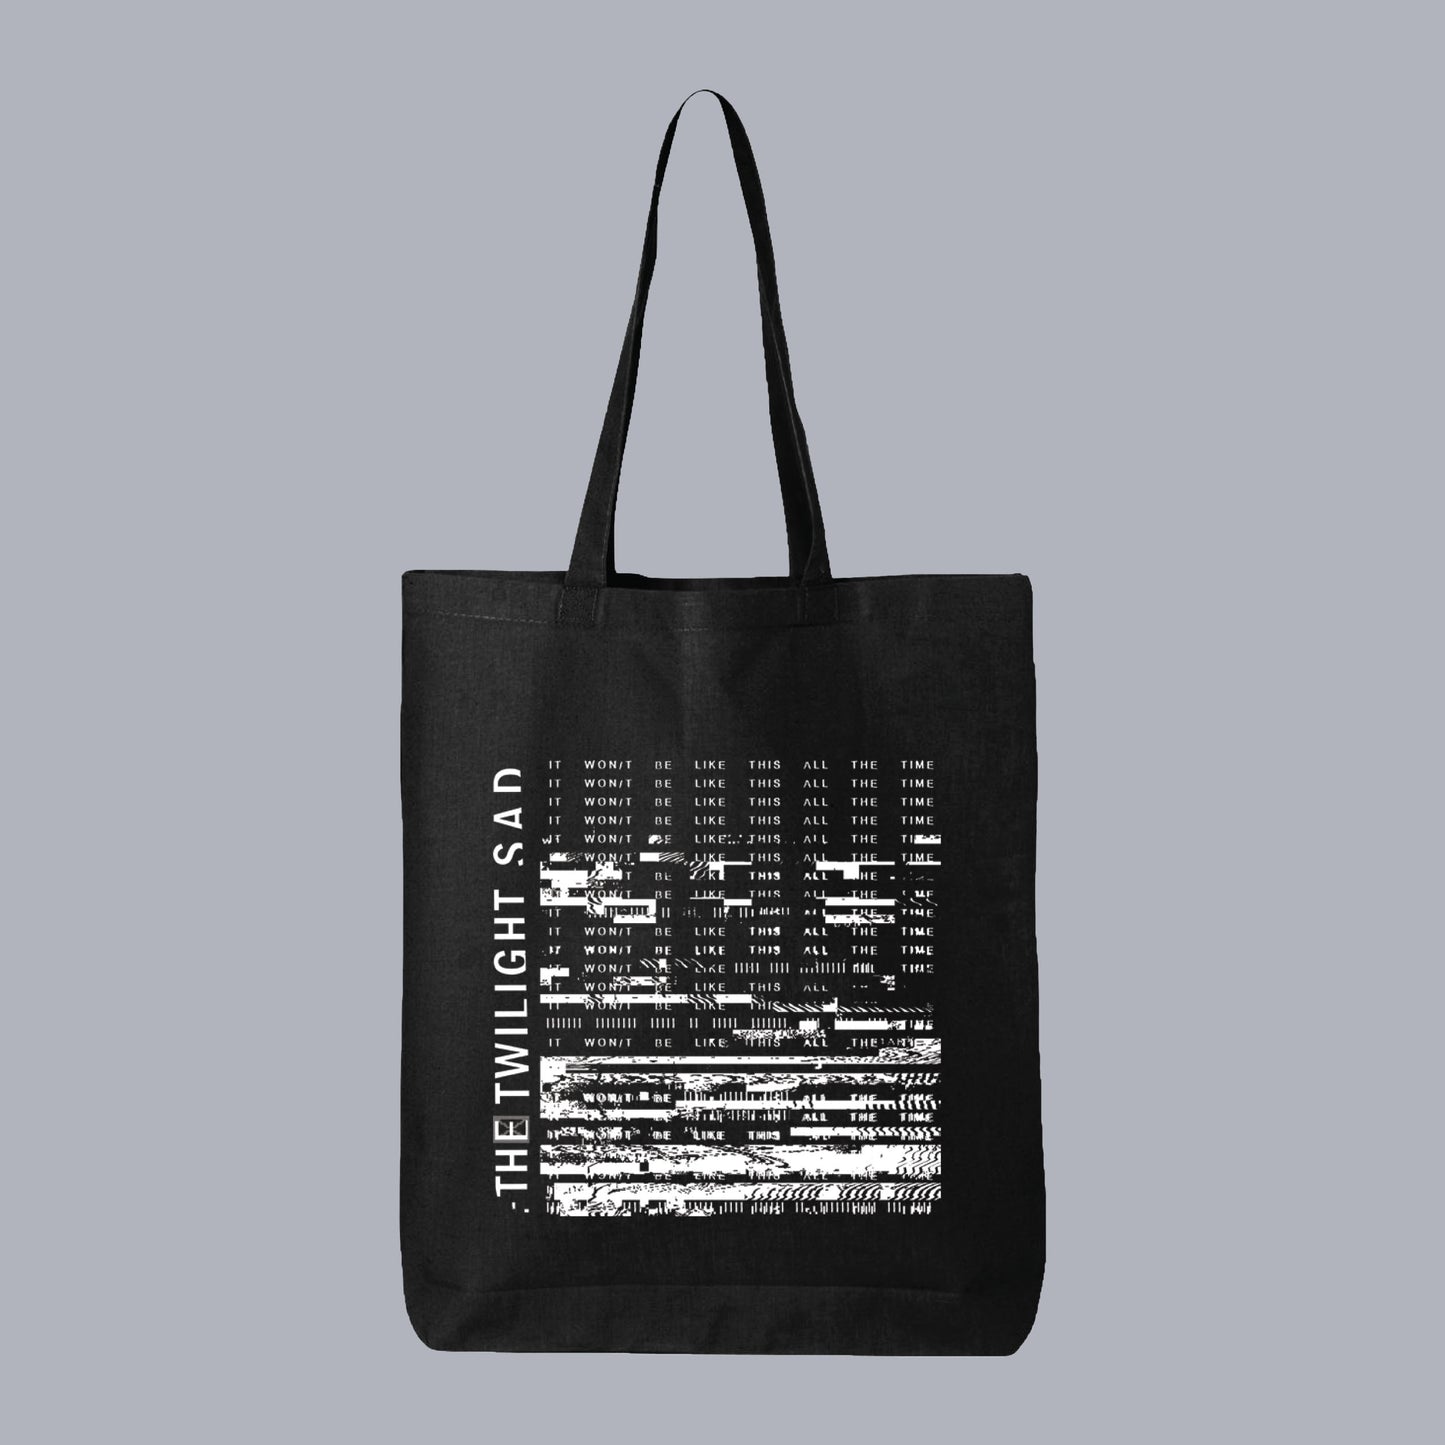 IT WON'T BE LIKE THIS ALL THE TIME Tote Bag